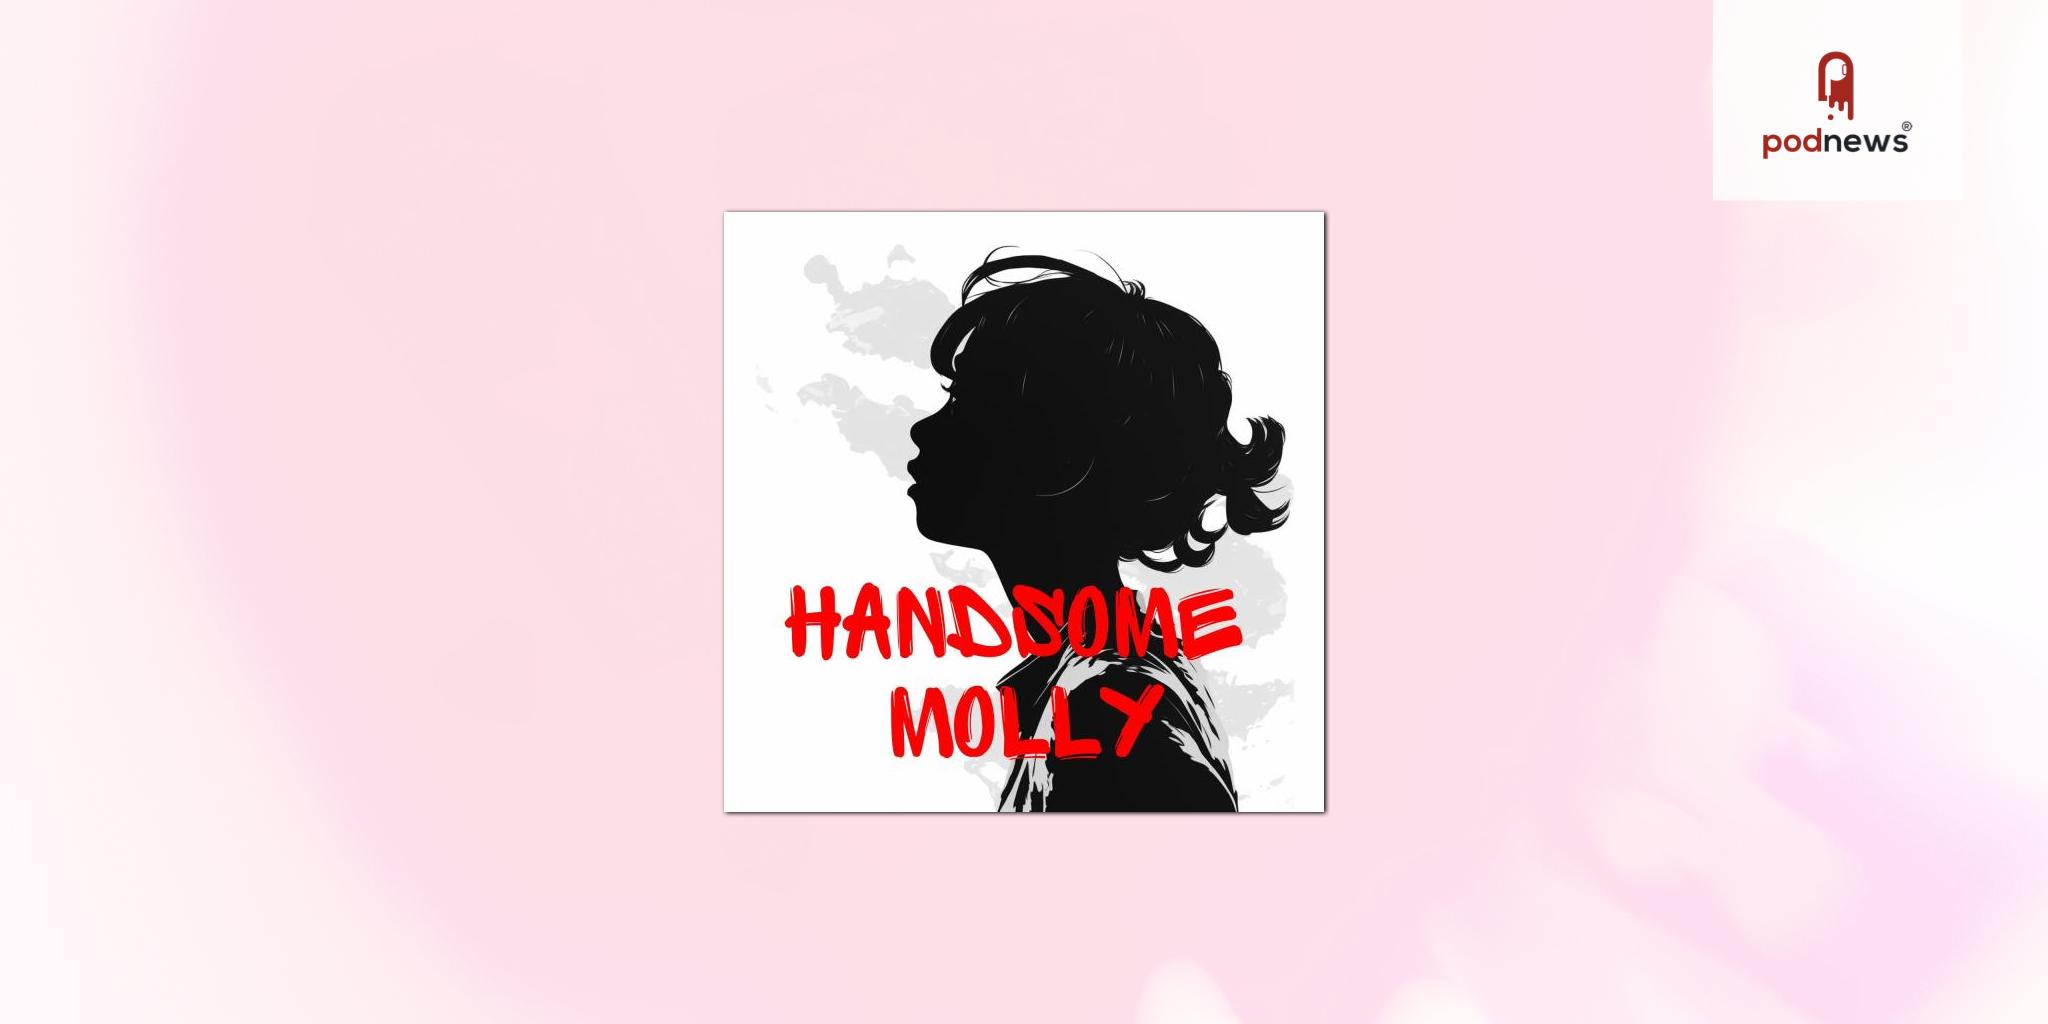 JAR Audio launches a new YA fiction podcast, Handsome Molly